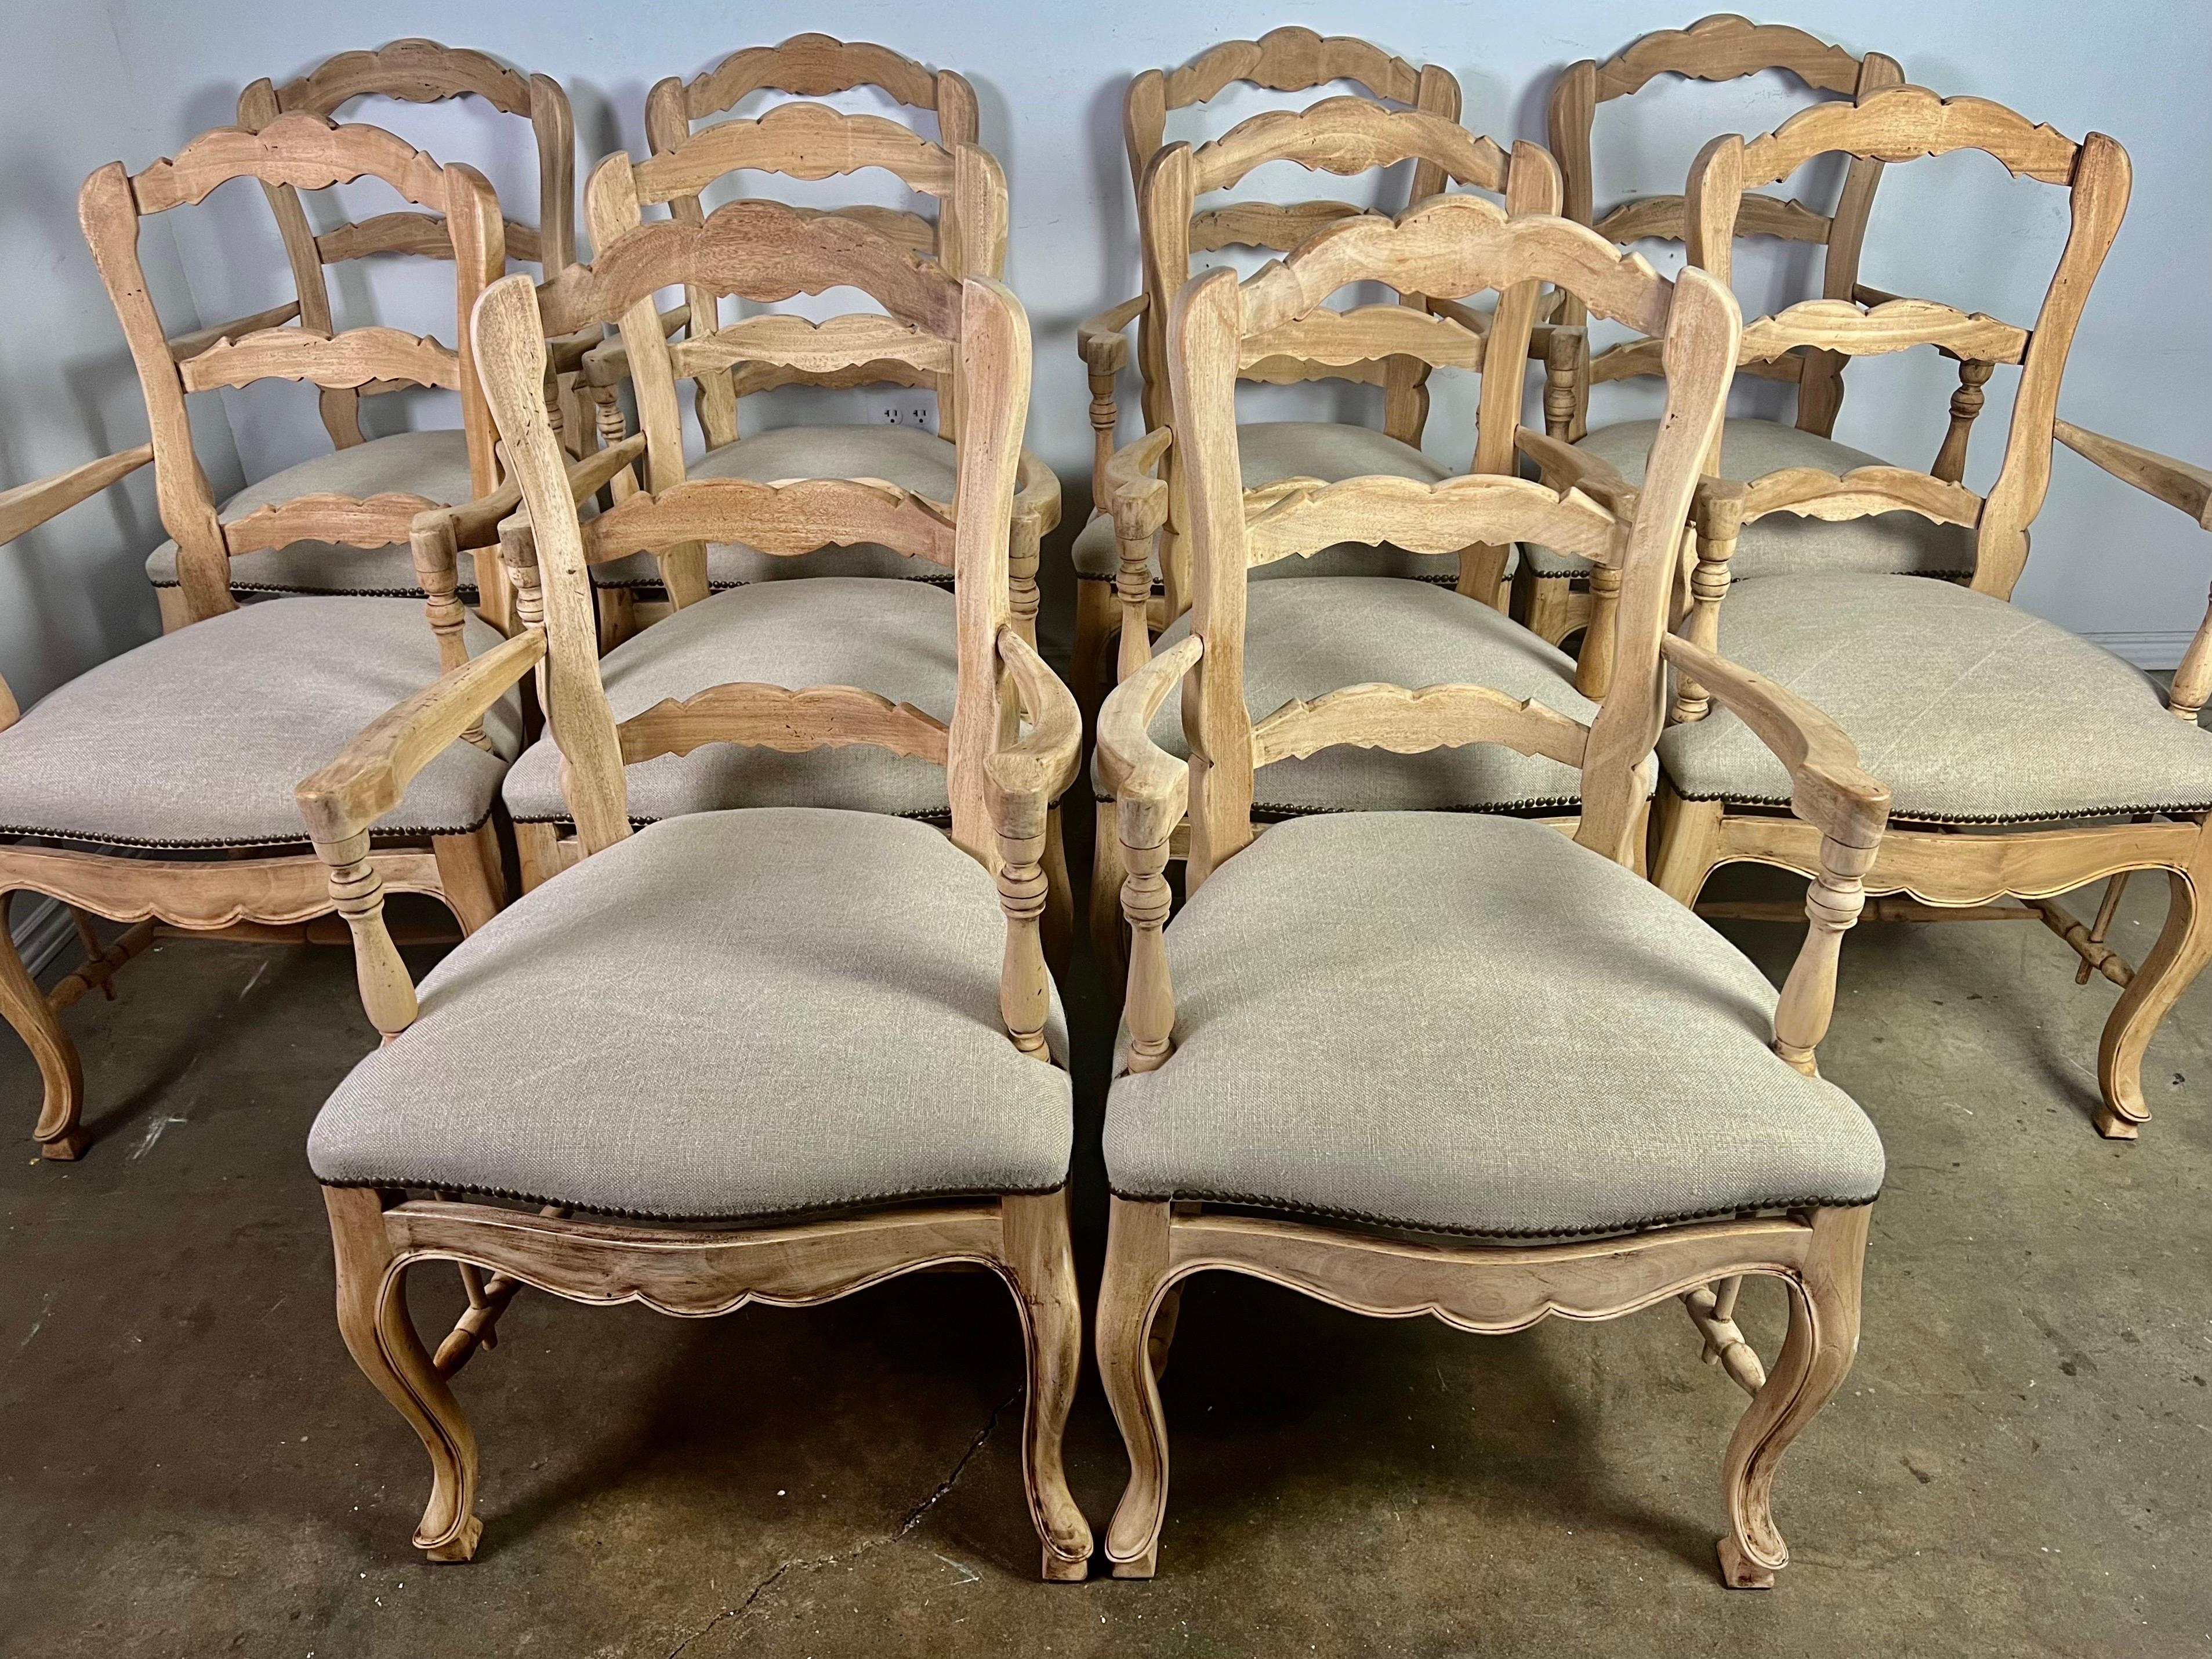 Set of (10) French Provincial style dining ladder back armchairs.  The chairs have a light natural walnut finish.  The chairs are newly reupholstered in a washed Belgium linen and detailed with nailheads.  